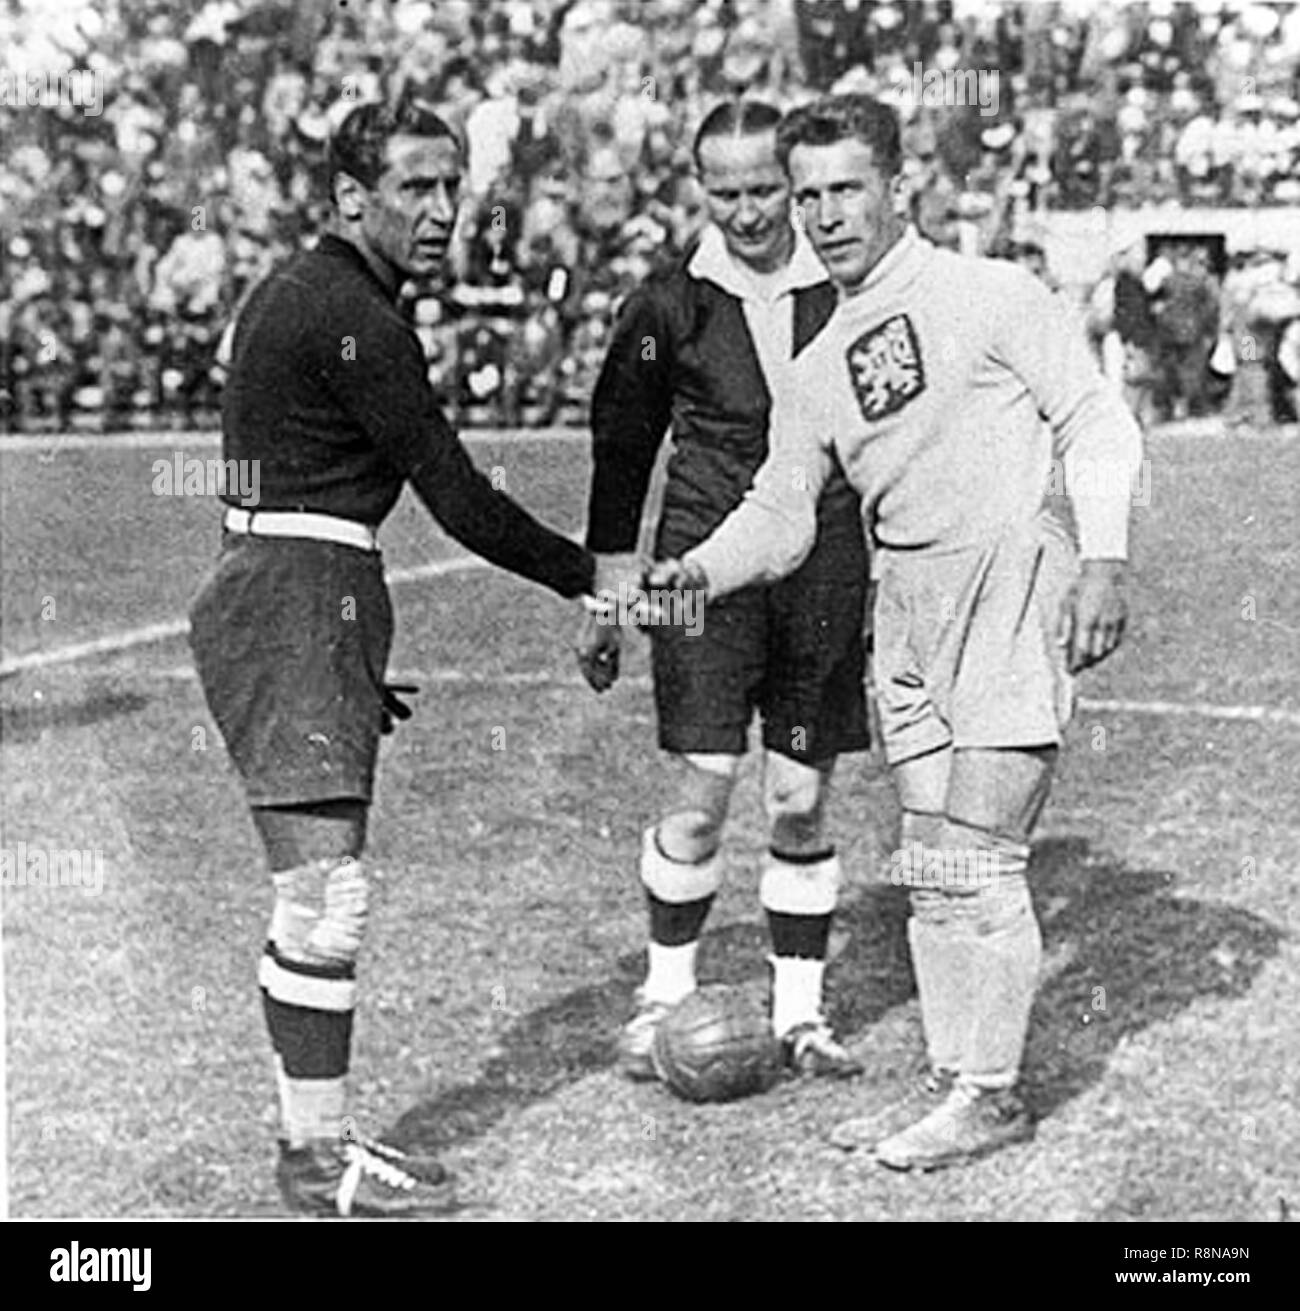 Rome , Italy. June, 10 1934. Greeting at the start of the game between Combi and Planicka during Final Italy - Czechoslovakia  . Stock Photo